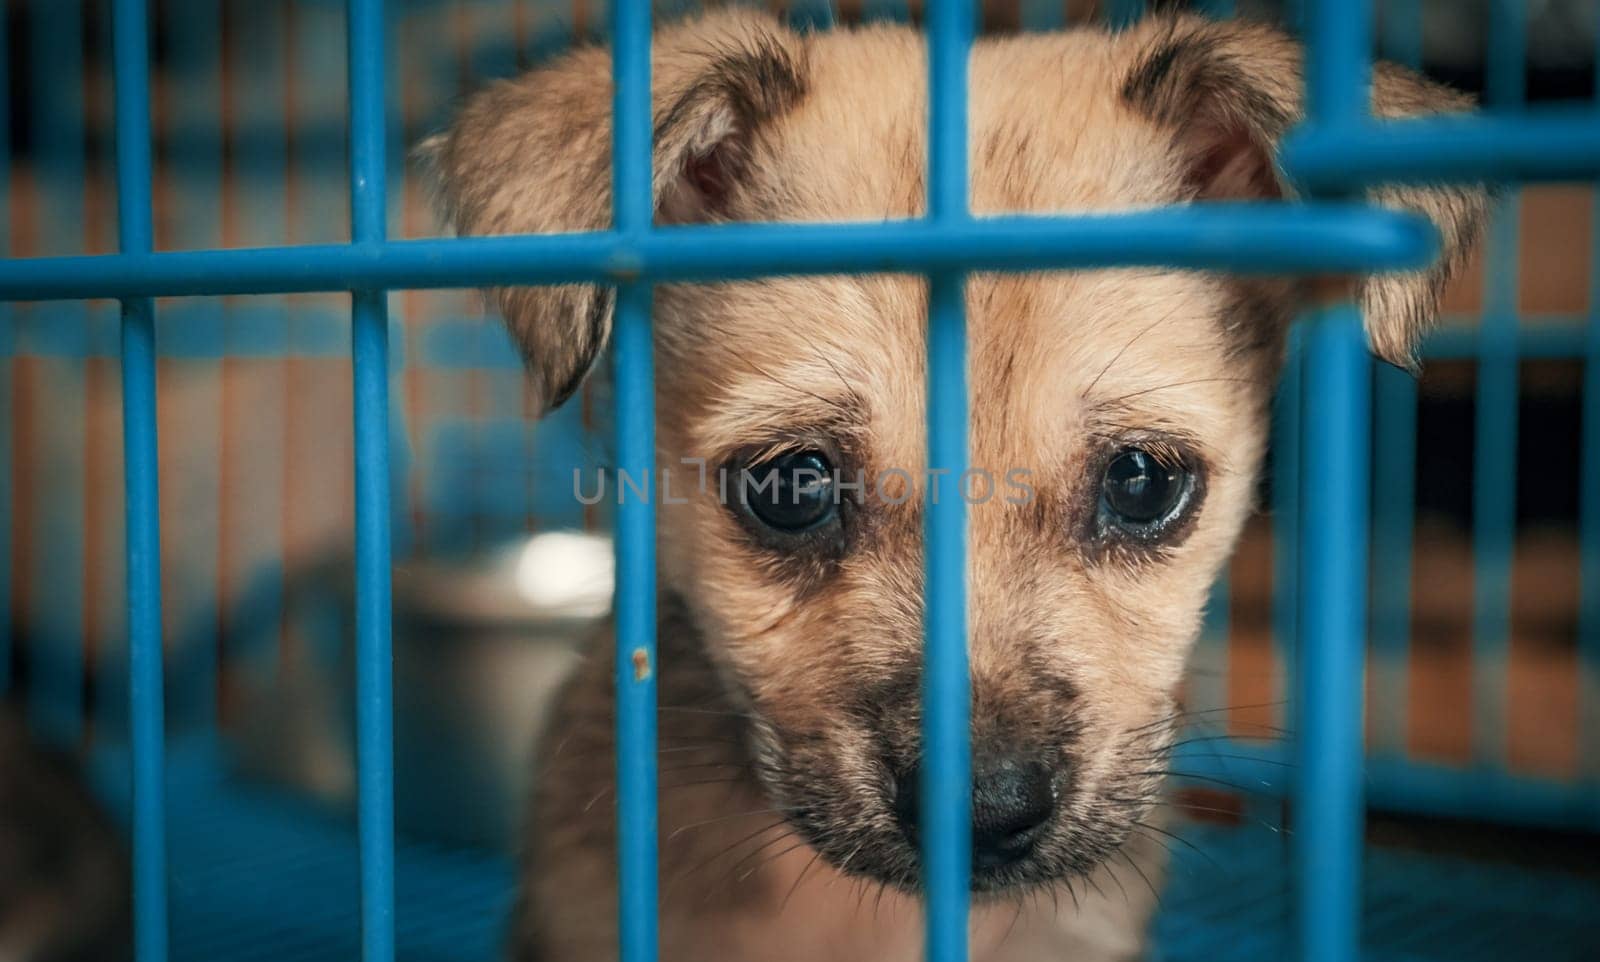 Sad puppy in shelter behind fence waiting to be rescued and adopted to new home. Shelter for animals concept by Busker